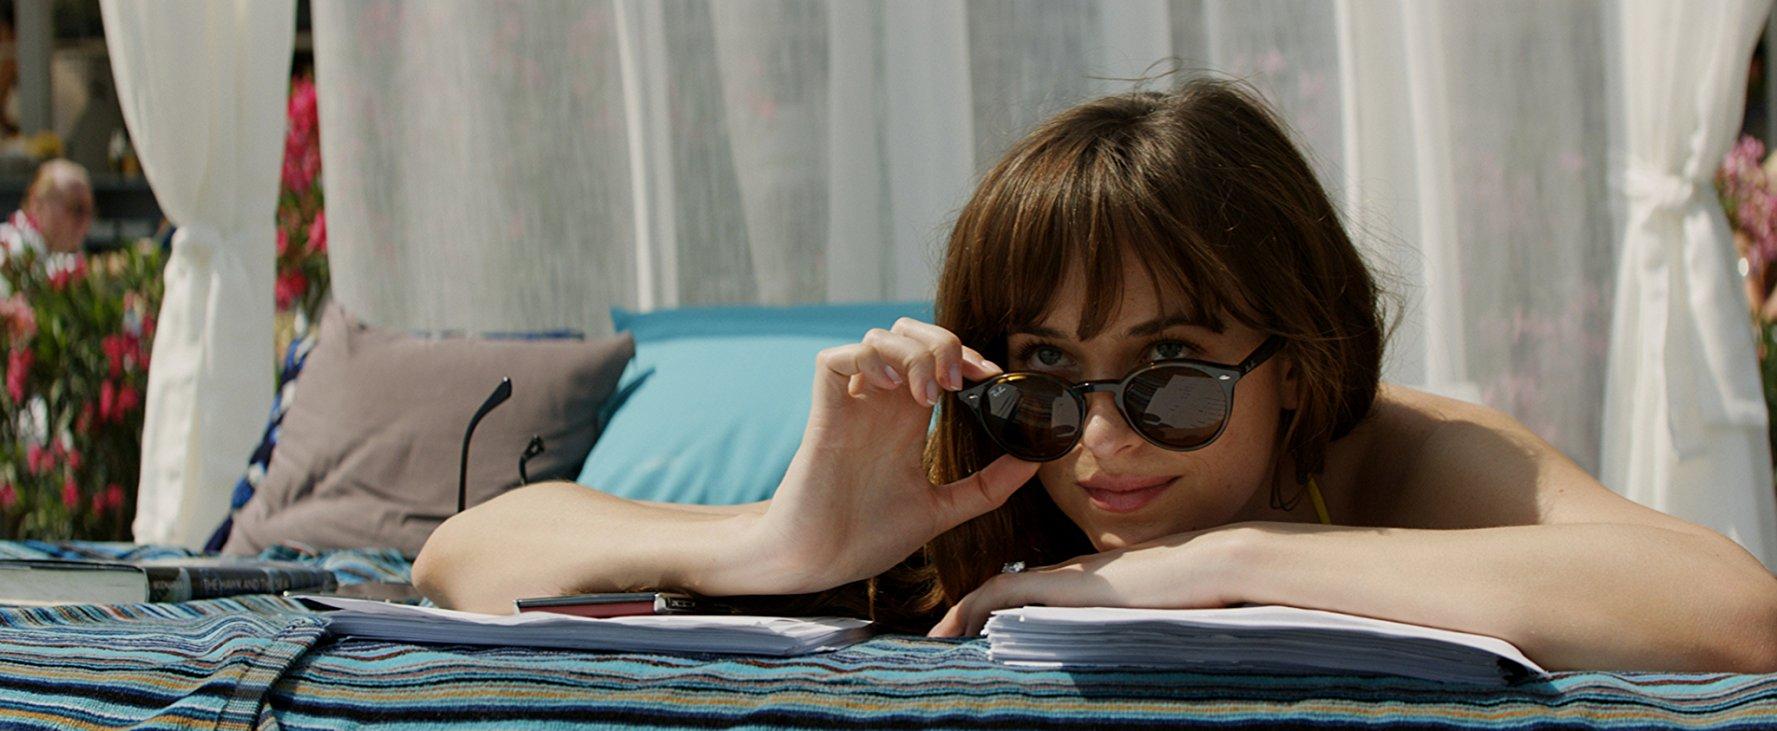 Is &#39;Fifty Shades Freed&#39; Fun And Trashy Or Just Boring? Here&#39;s What The  Reviews Say - Digg